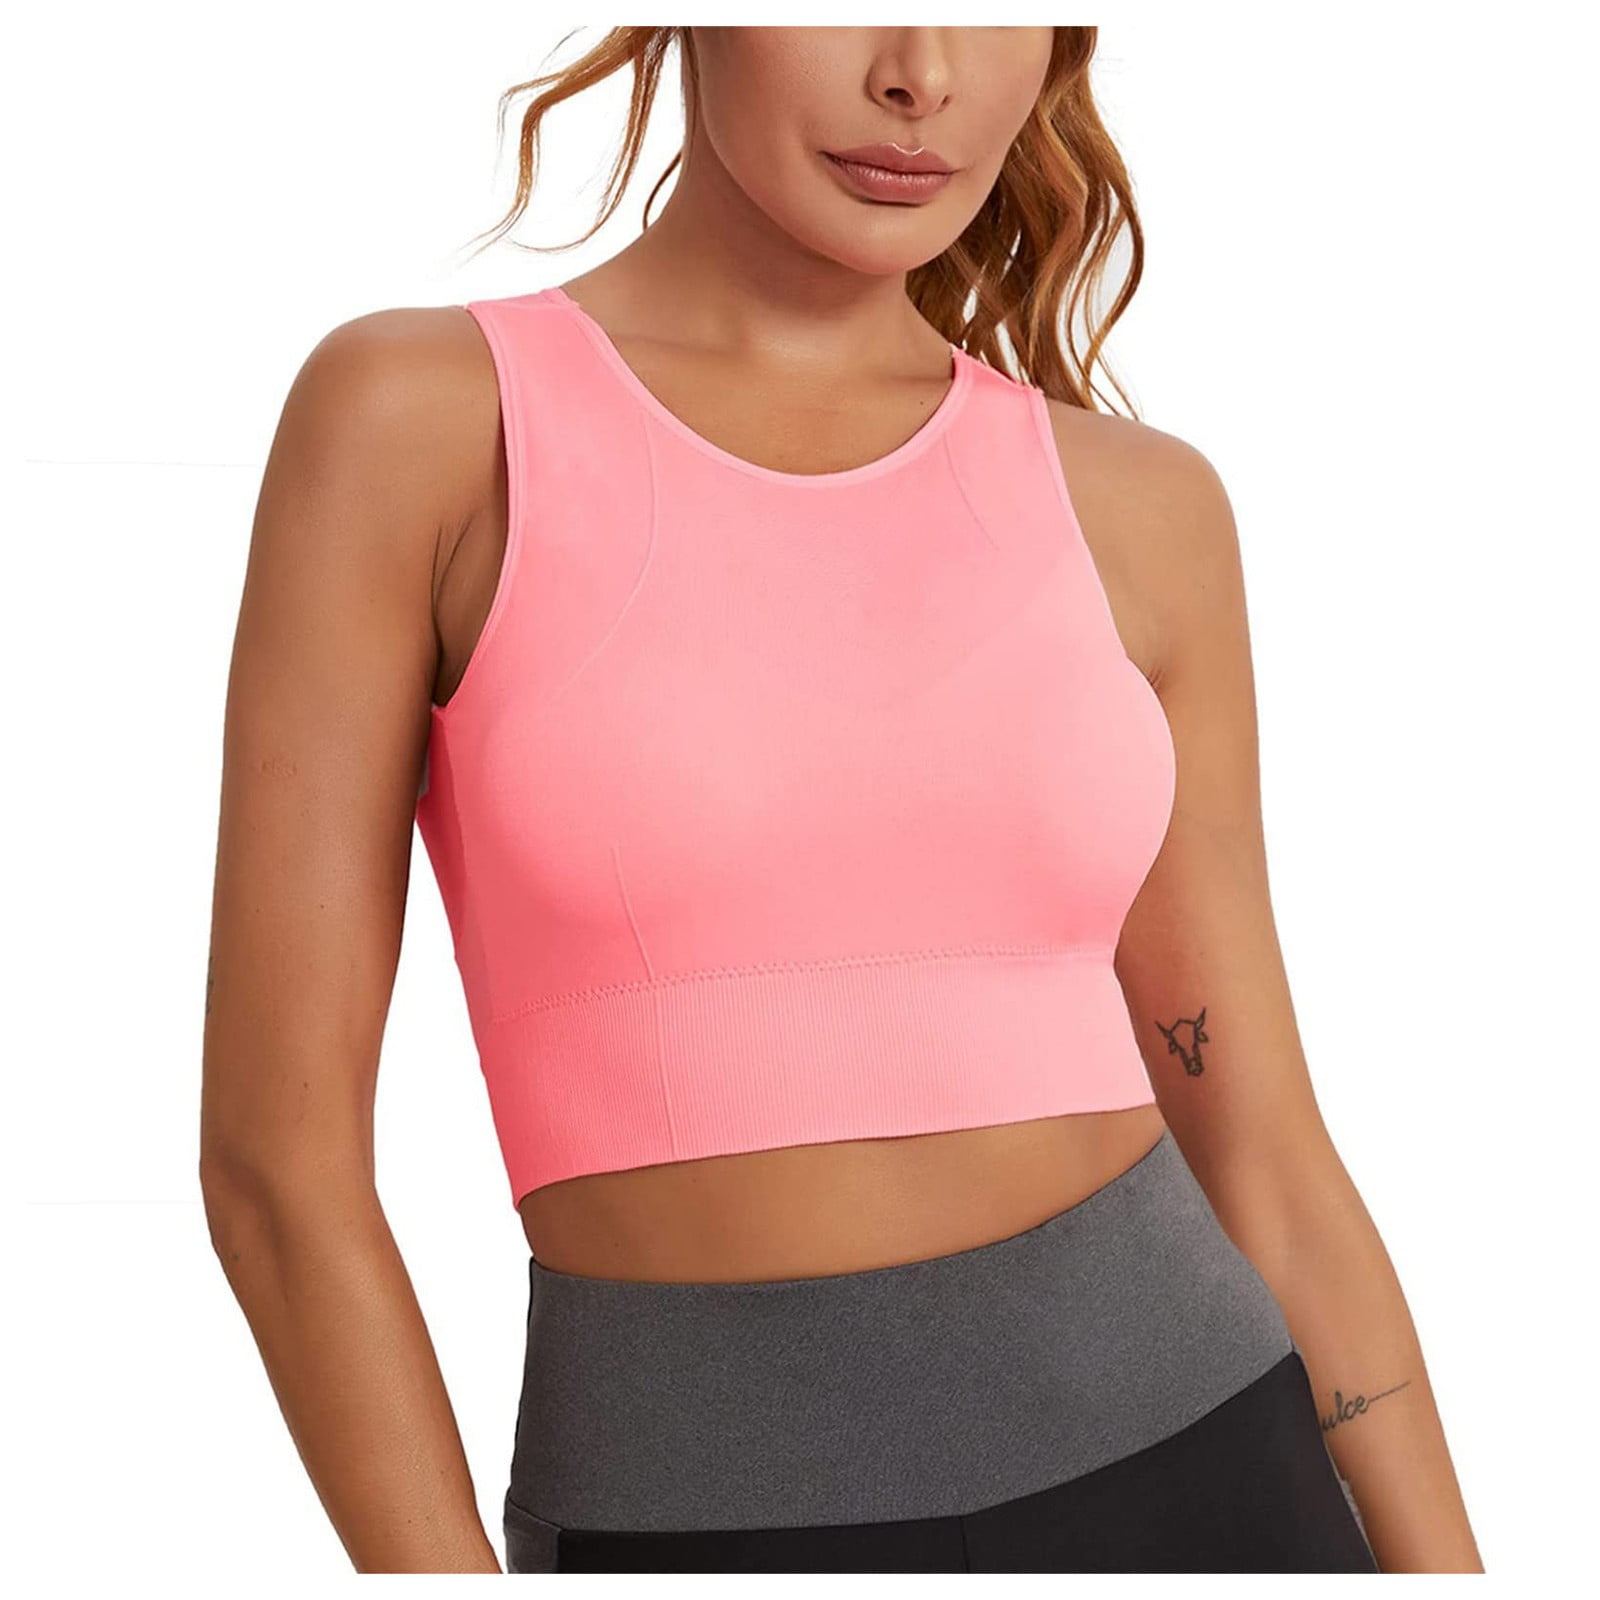 Pink Large Bust Crop Top, Full Bust Sports Bra